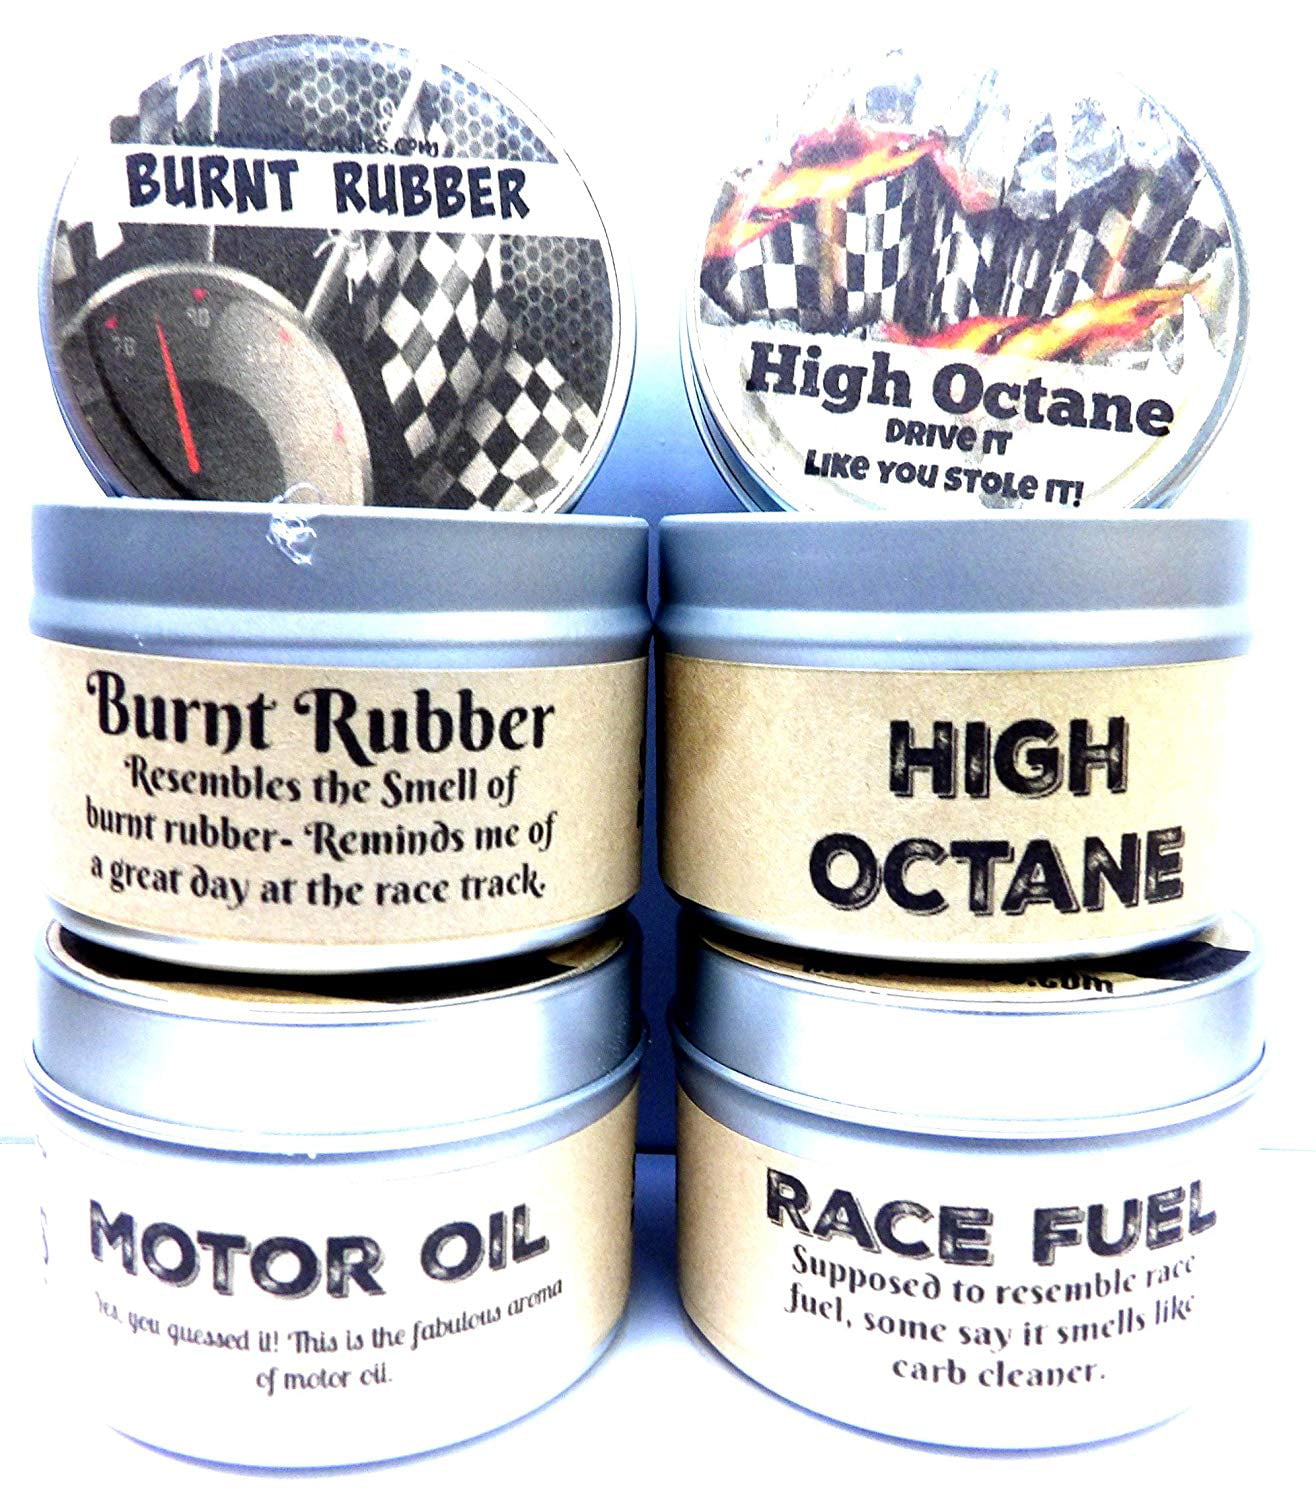 Motor Oil and Burnt Rubber 4 Oz All Nat High Octane Combo Set of 4 Race Fuel 